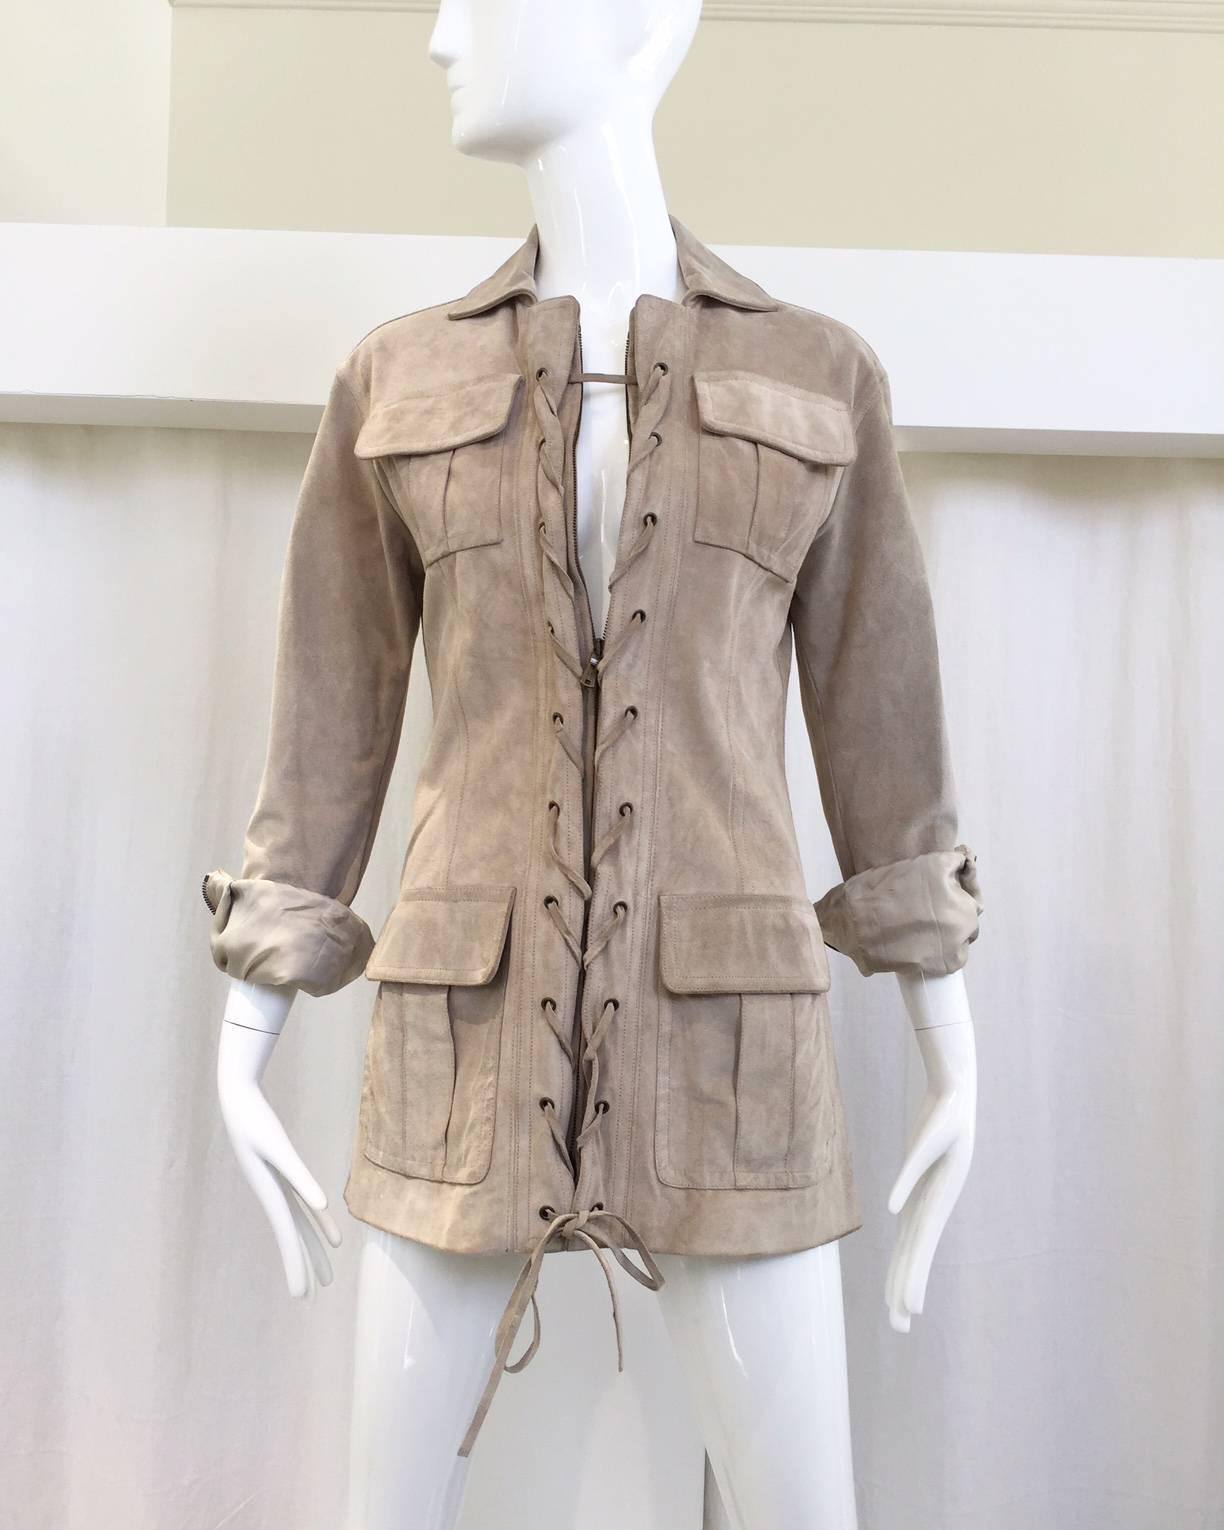 2000s Iconic YSL suede safari inspired jacket. zip up and lace. Perfect vacation suede jacket. Small
Bust: 34"/ Waist: 32"/ Hip: 36"/ sleeve: 24"
Size: 4